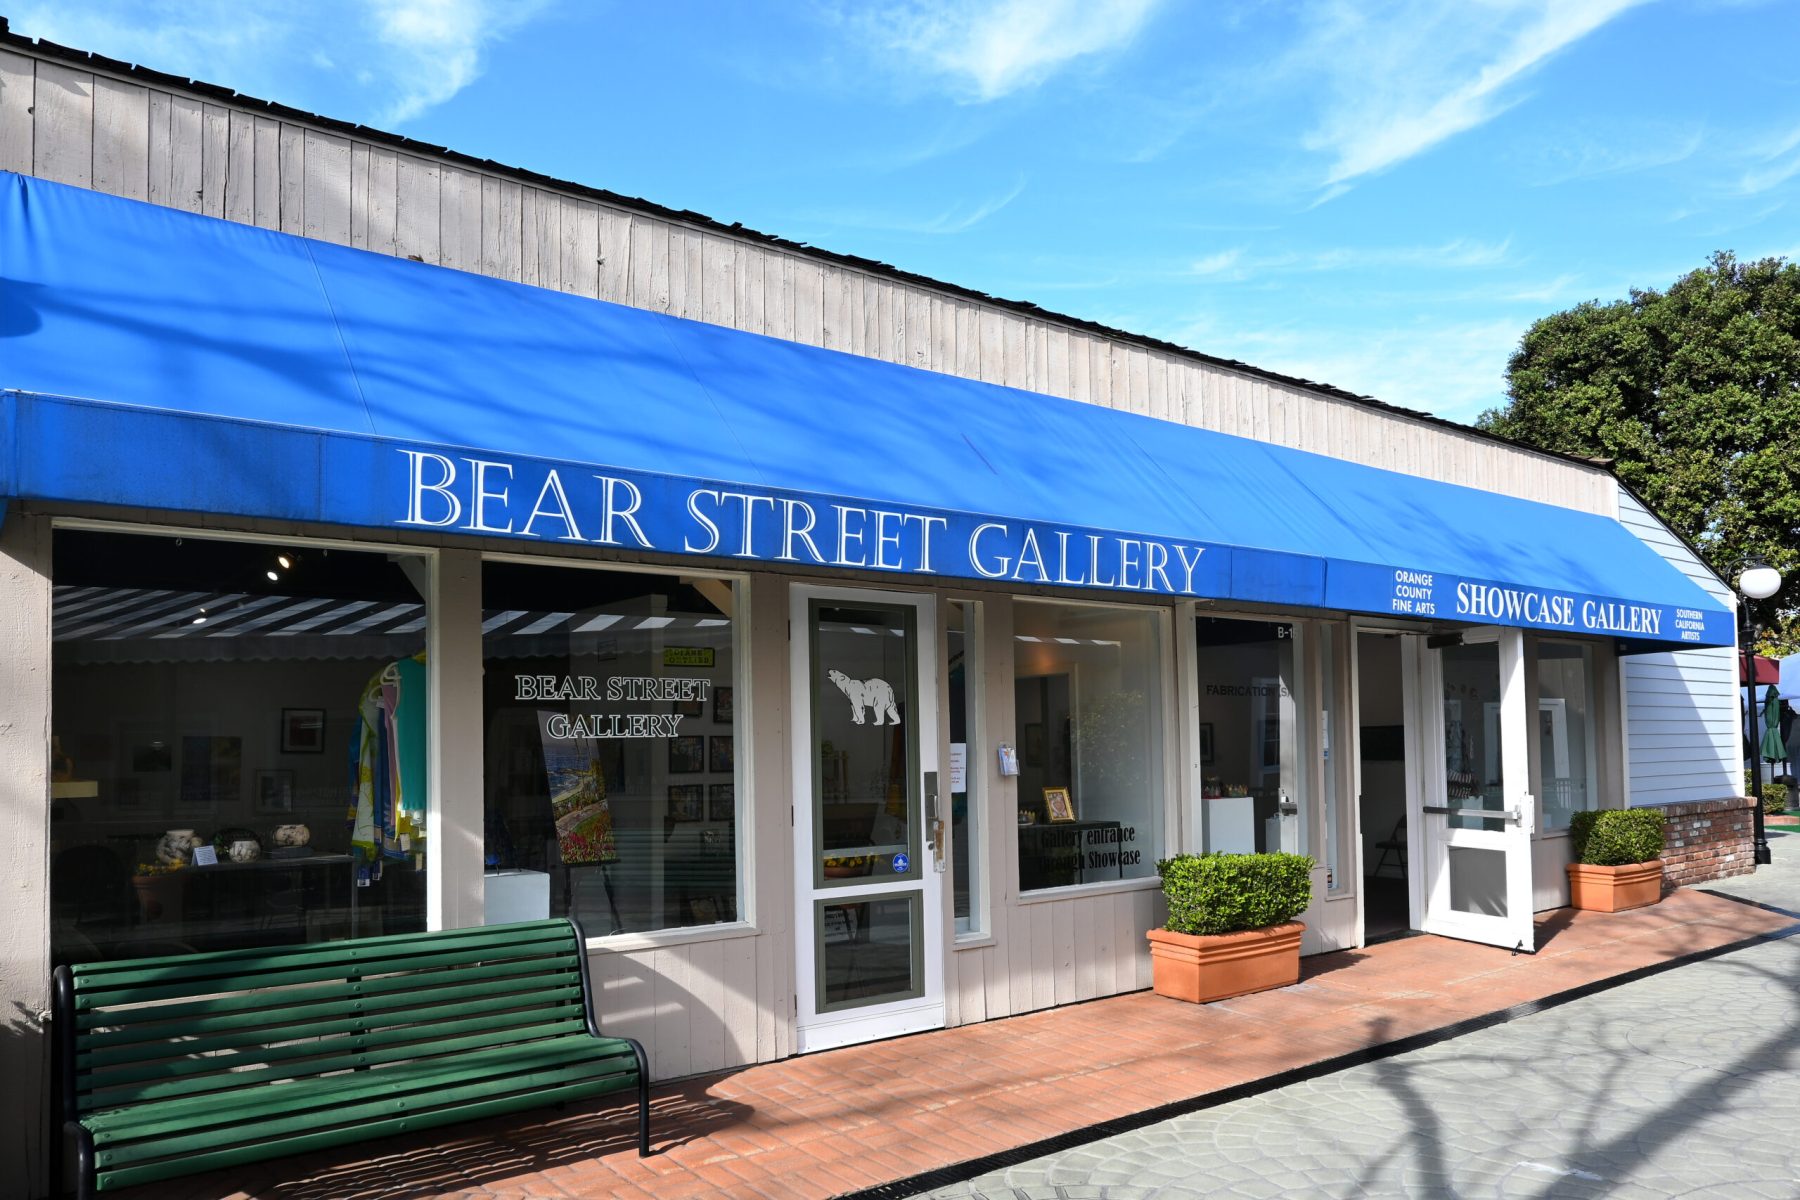 SANTA ANA, CALIFORNIA - 26 JAN 2022: Bear Street Gallery and Showcase Gallery, two locations for Members of Orange County Fine Arts to exhibit and sell their work.